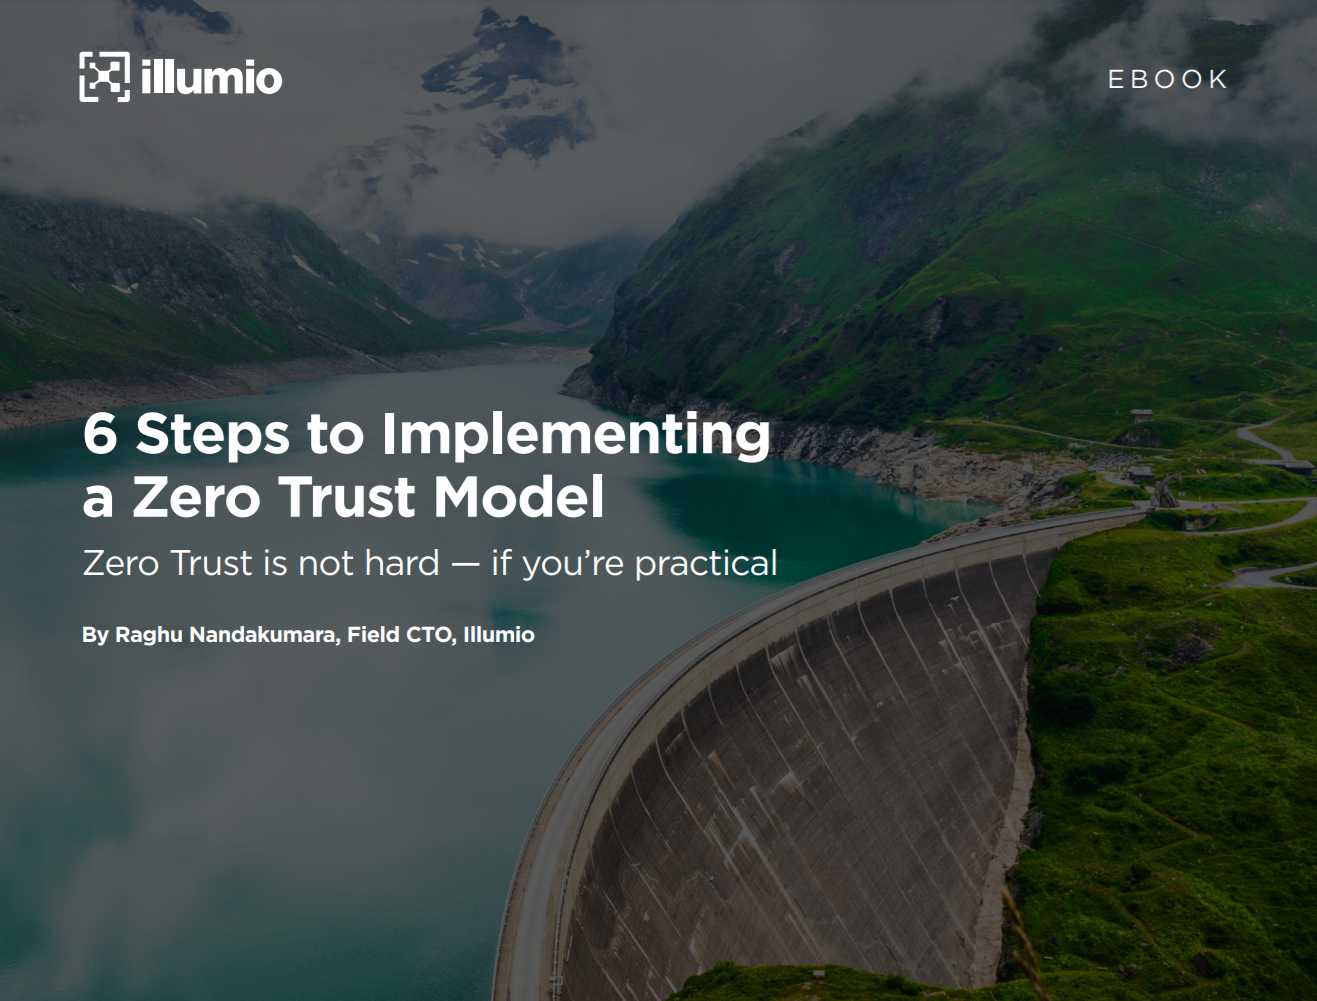 6 Steps to Implementing a Zero Trust Model